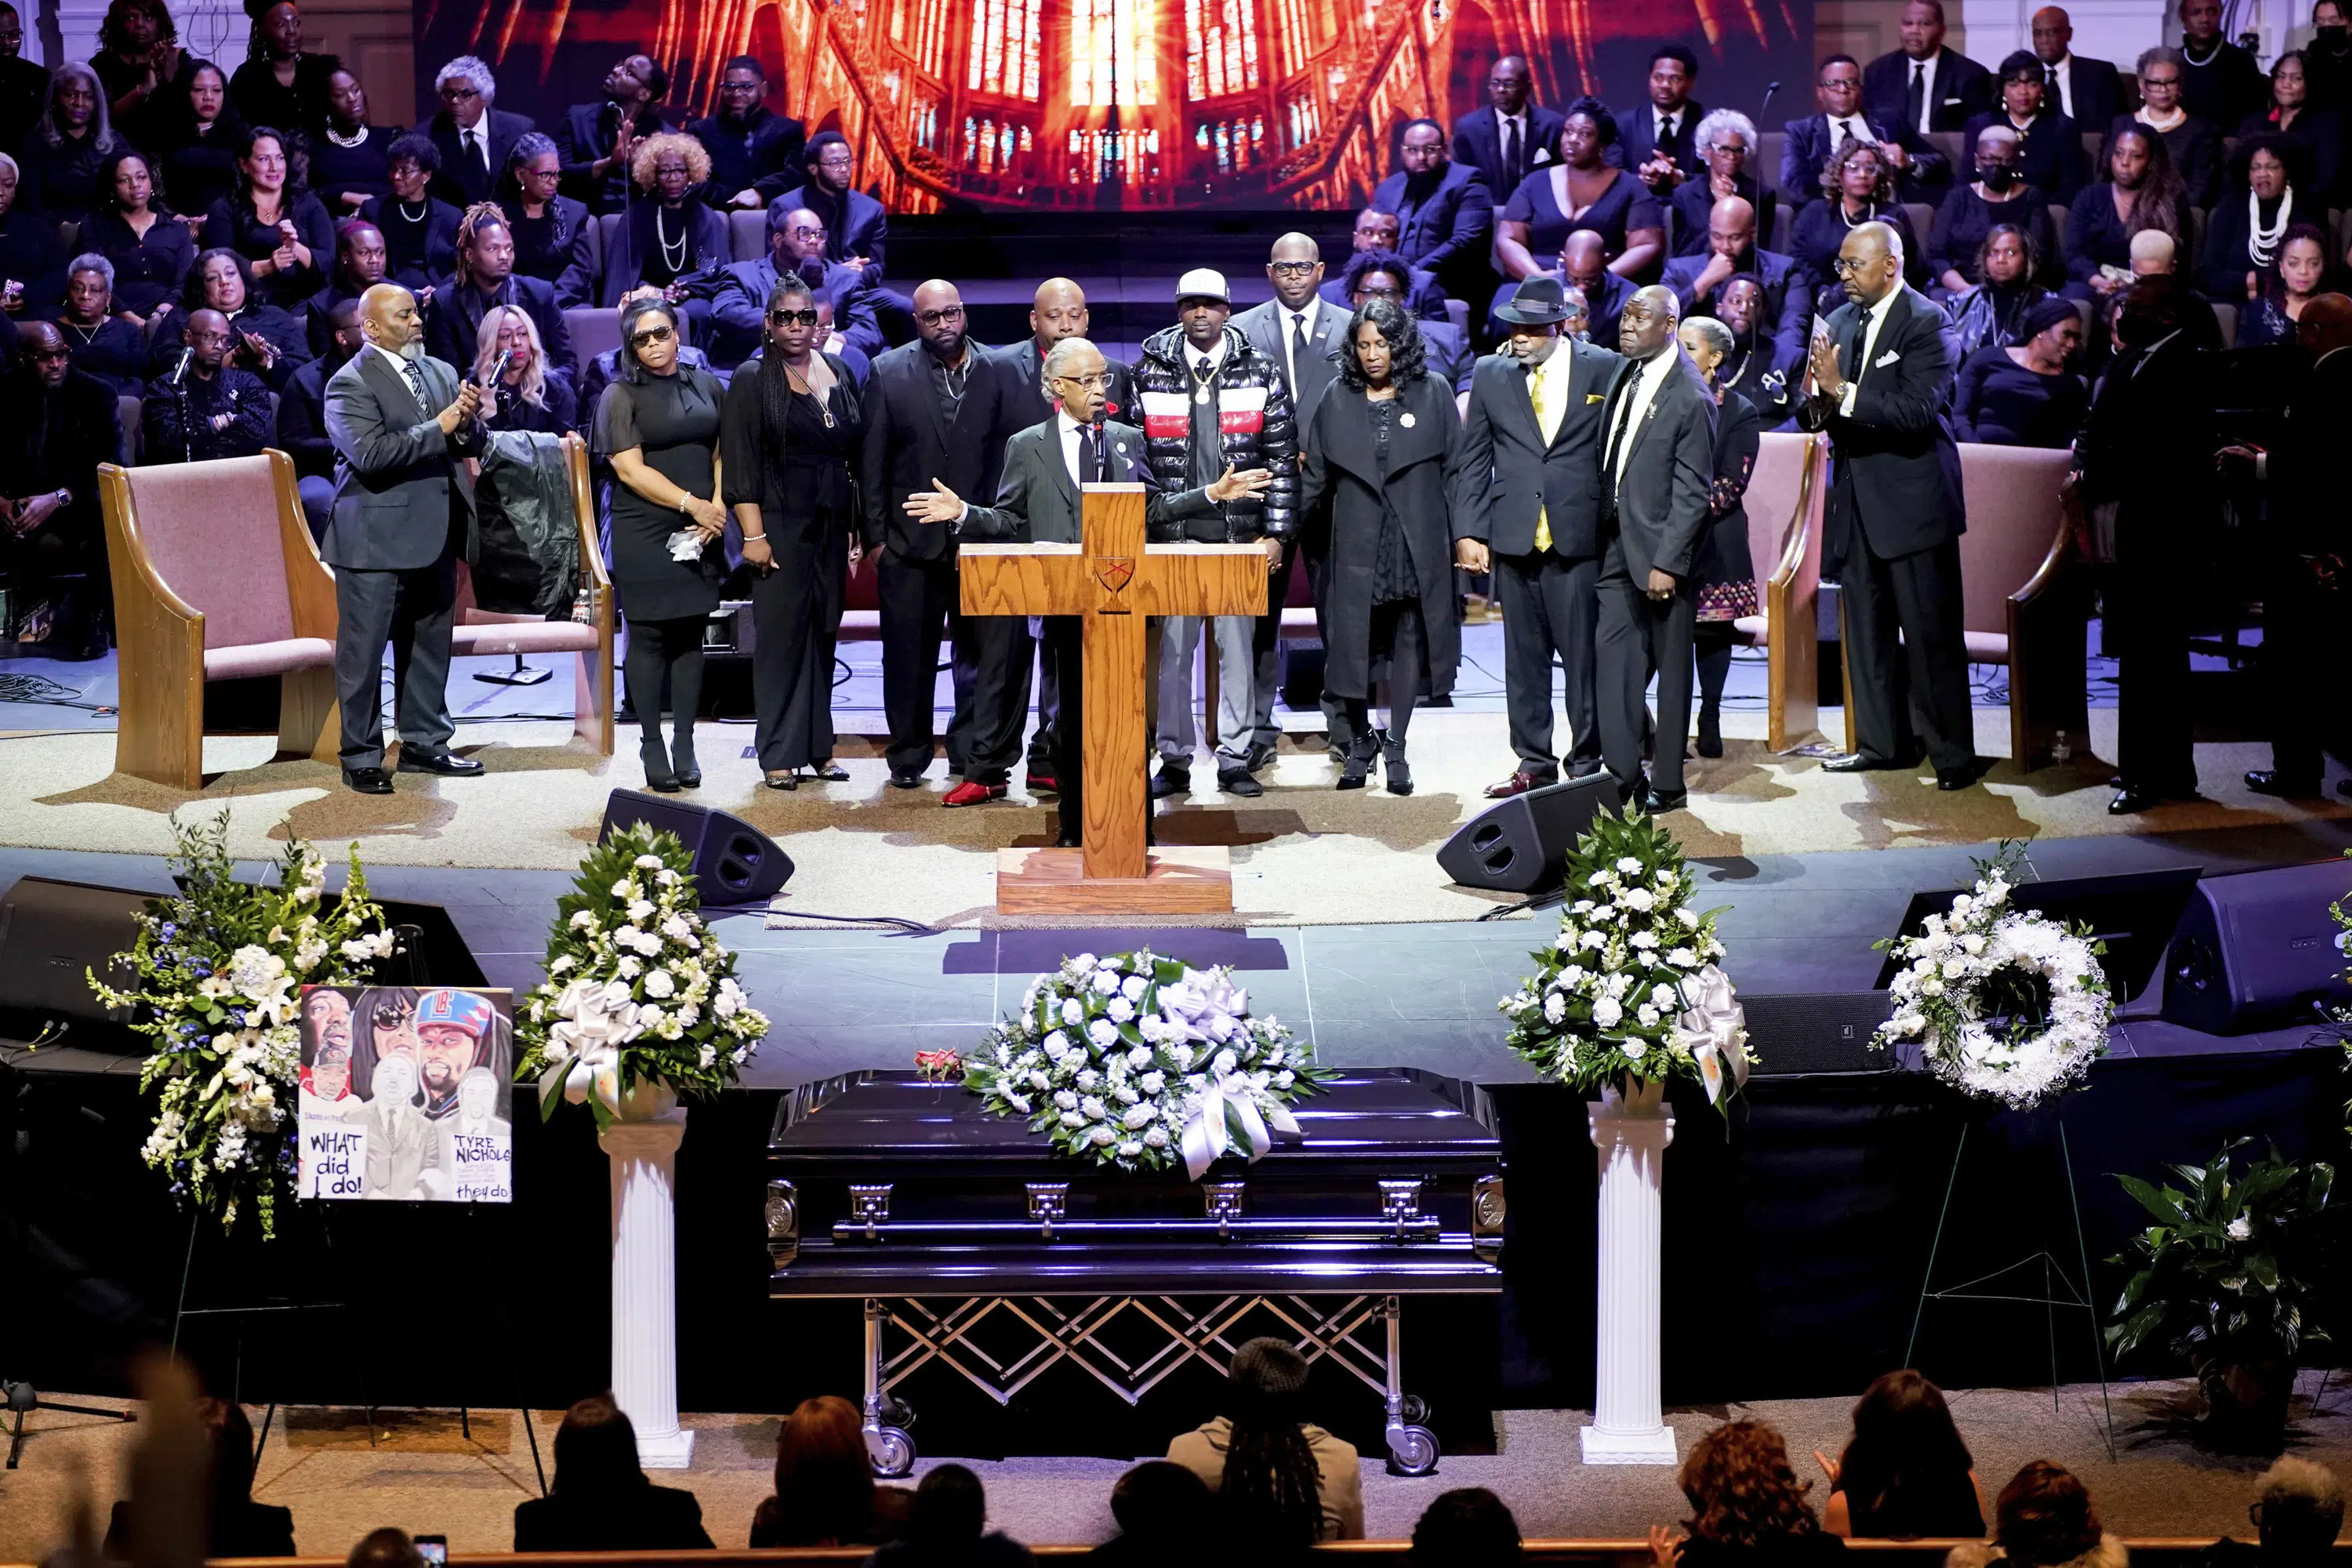 Impassioned calls for police reform at Tyre Nichols' funeral - The Associated Press